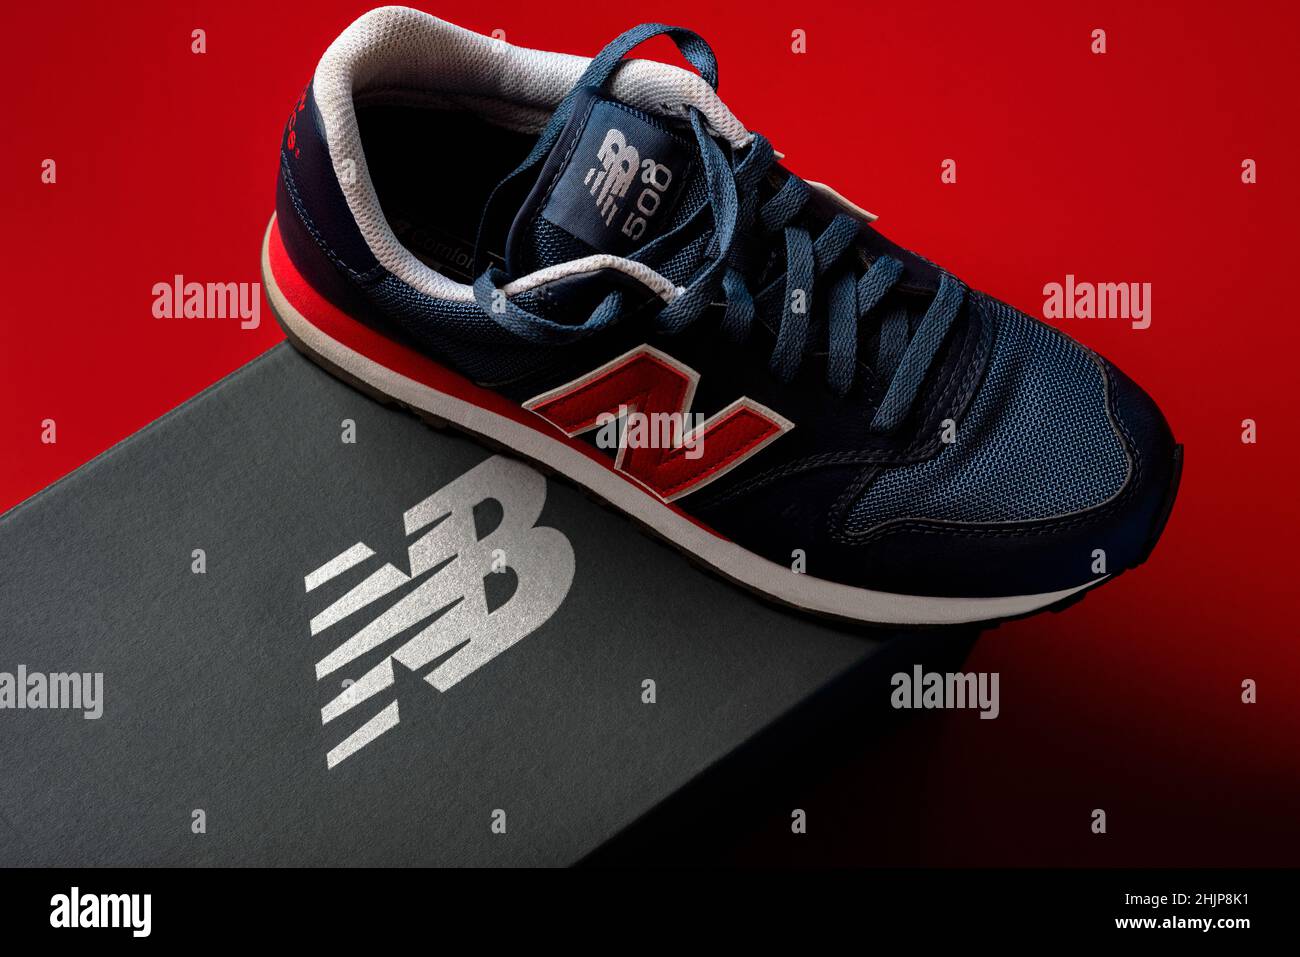 New Balance 500 dark blue sneakers with the New Balance gray box over red background. Casual sport shoes closeup Stock Photo